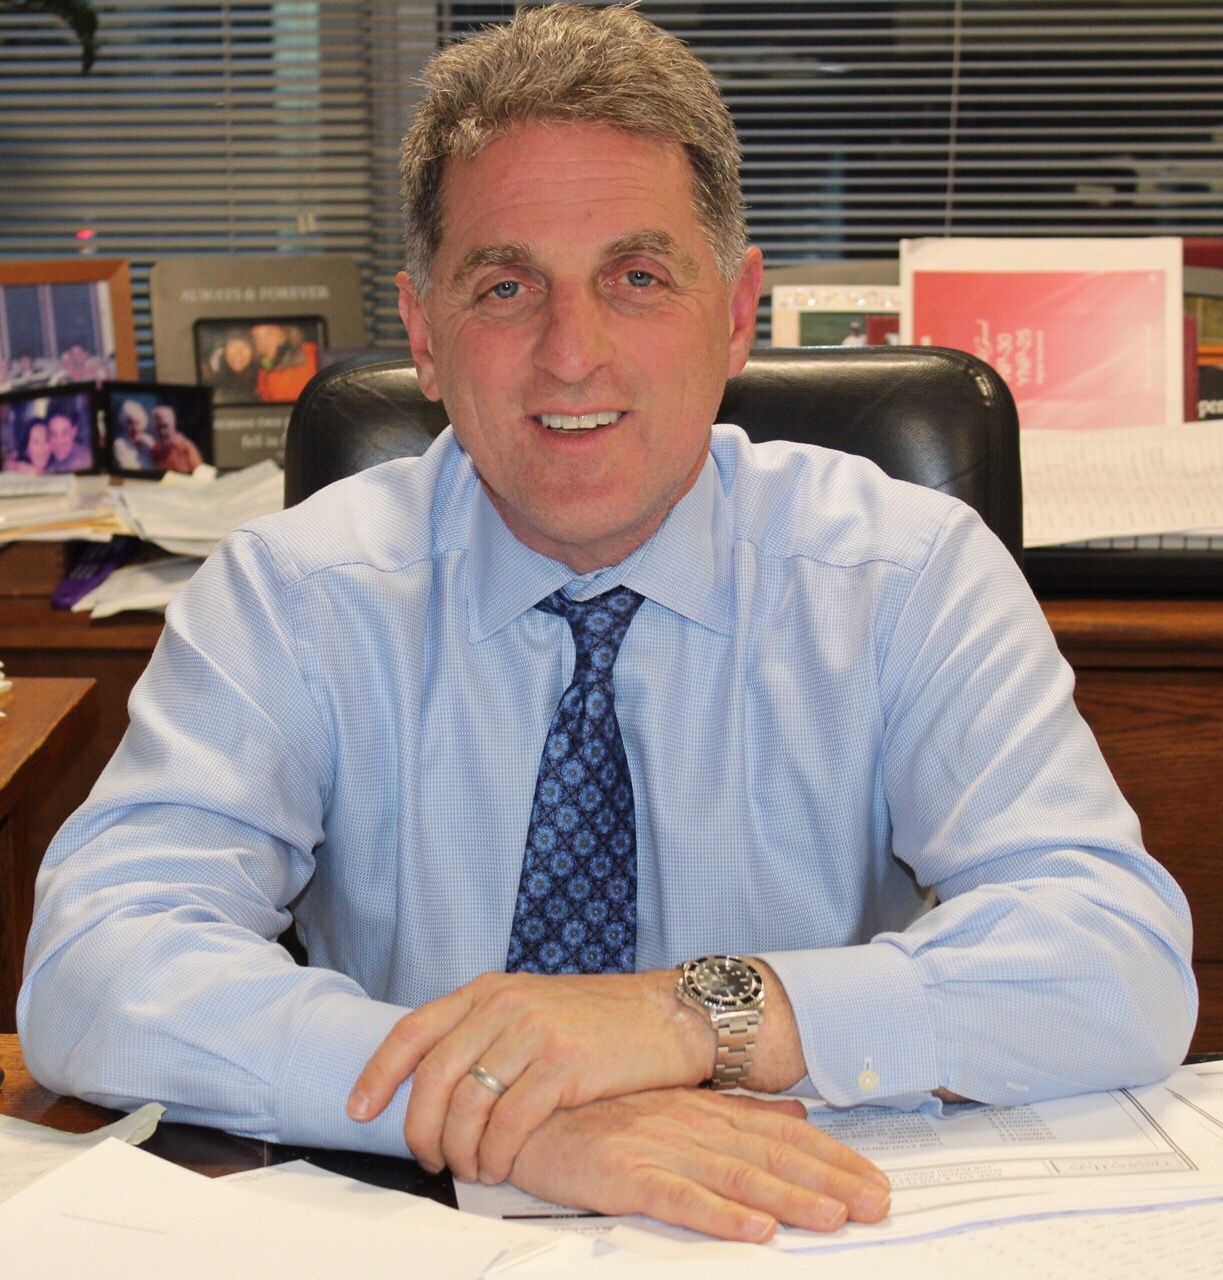 Daniel Wollman, CEO, Gumley Haft, at his desk of the property management company he leads serving coops and condos in New York.